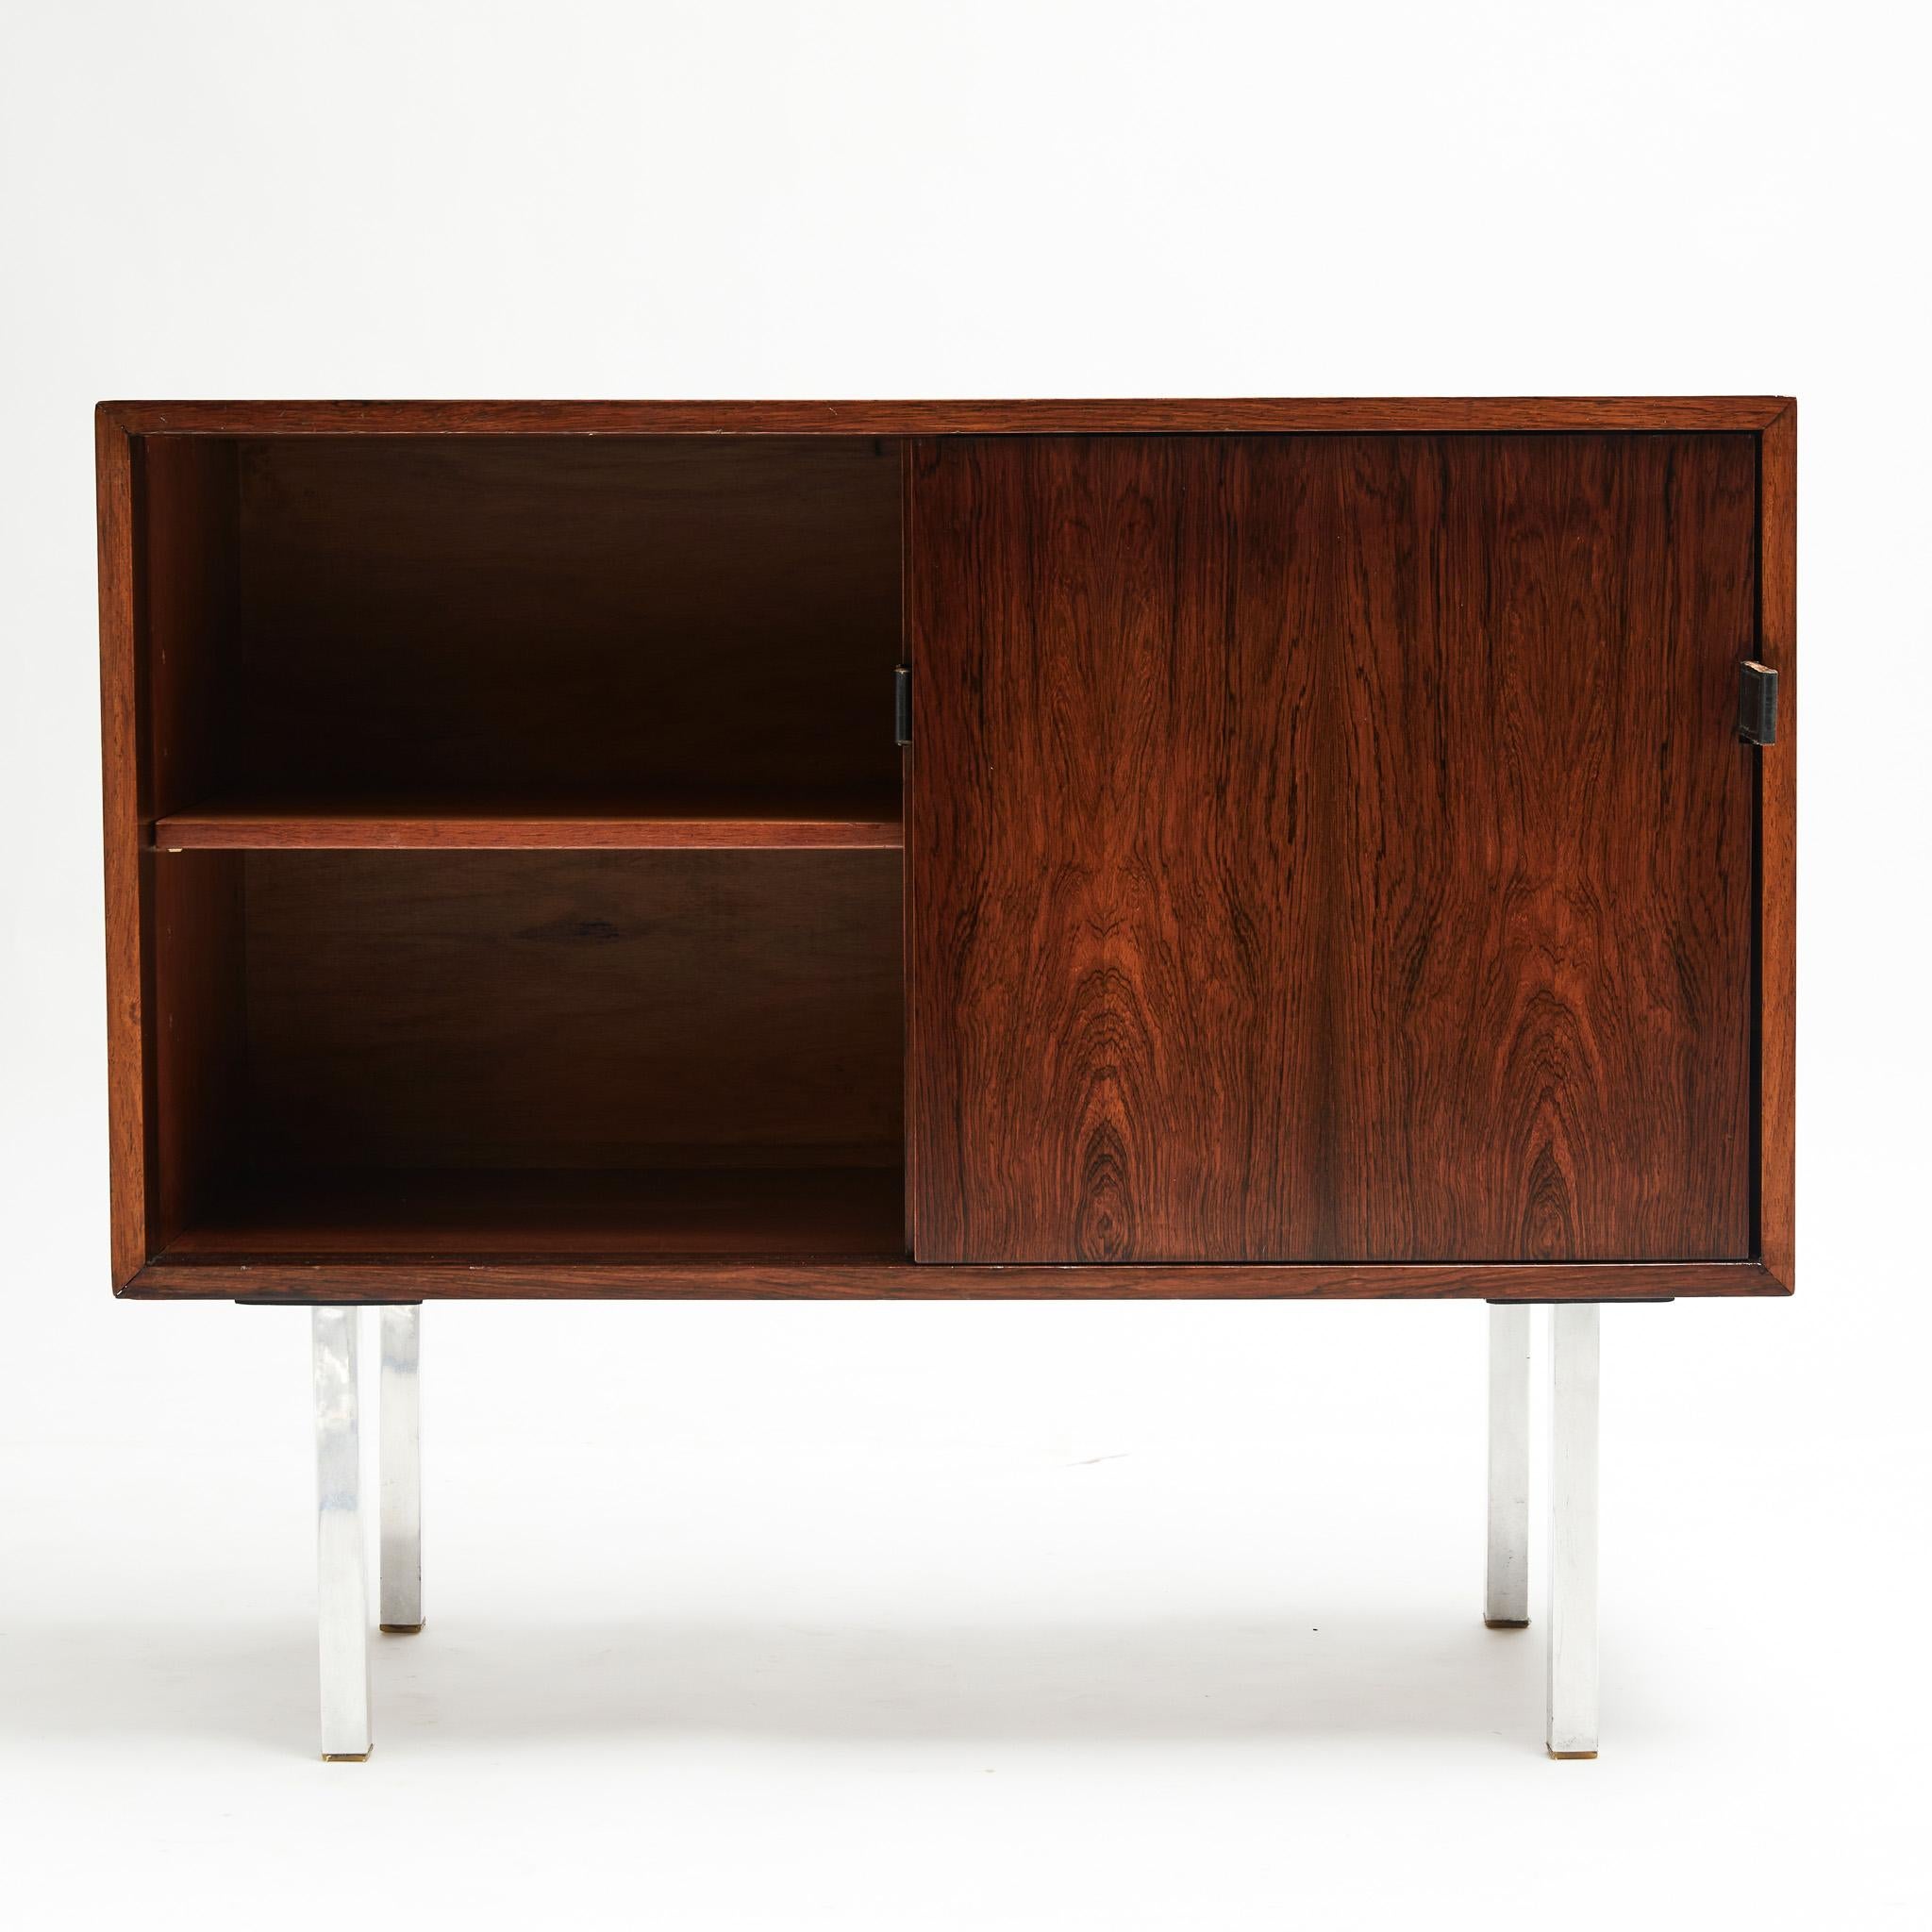 Mid-Century Modern Midcentury Chest in Hardwood & Chrome by Forma Moveis, 1965 Brazil, Sealed For Sale